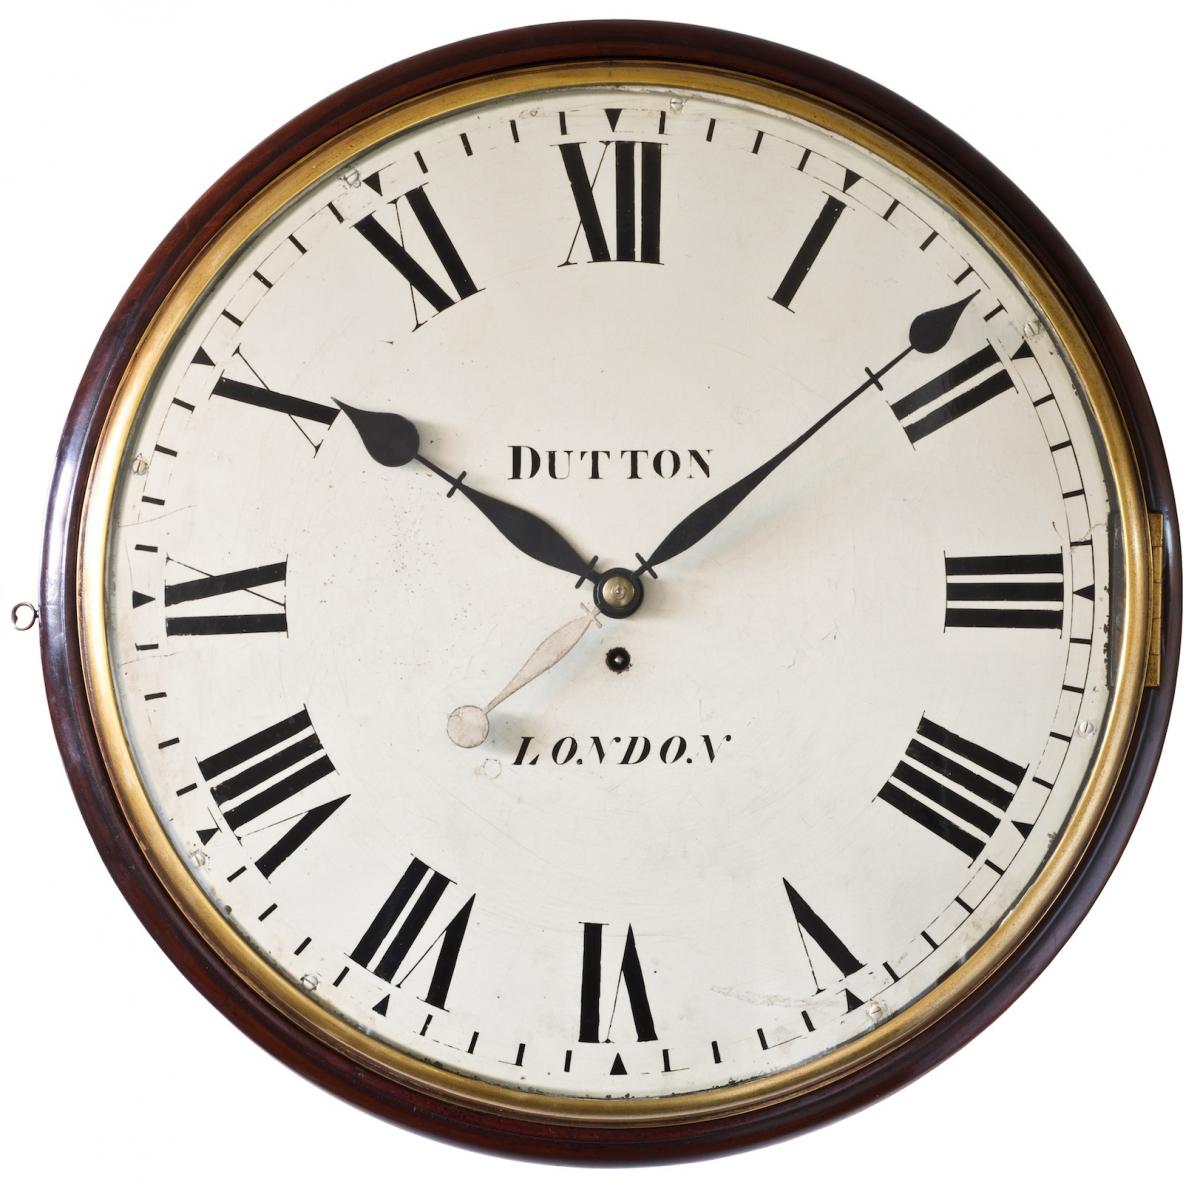 Dutton, London, An unusually large and impressive wall timepiece, Circa 1835